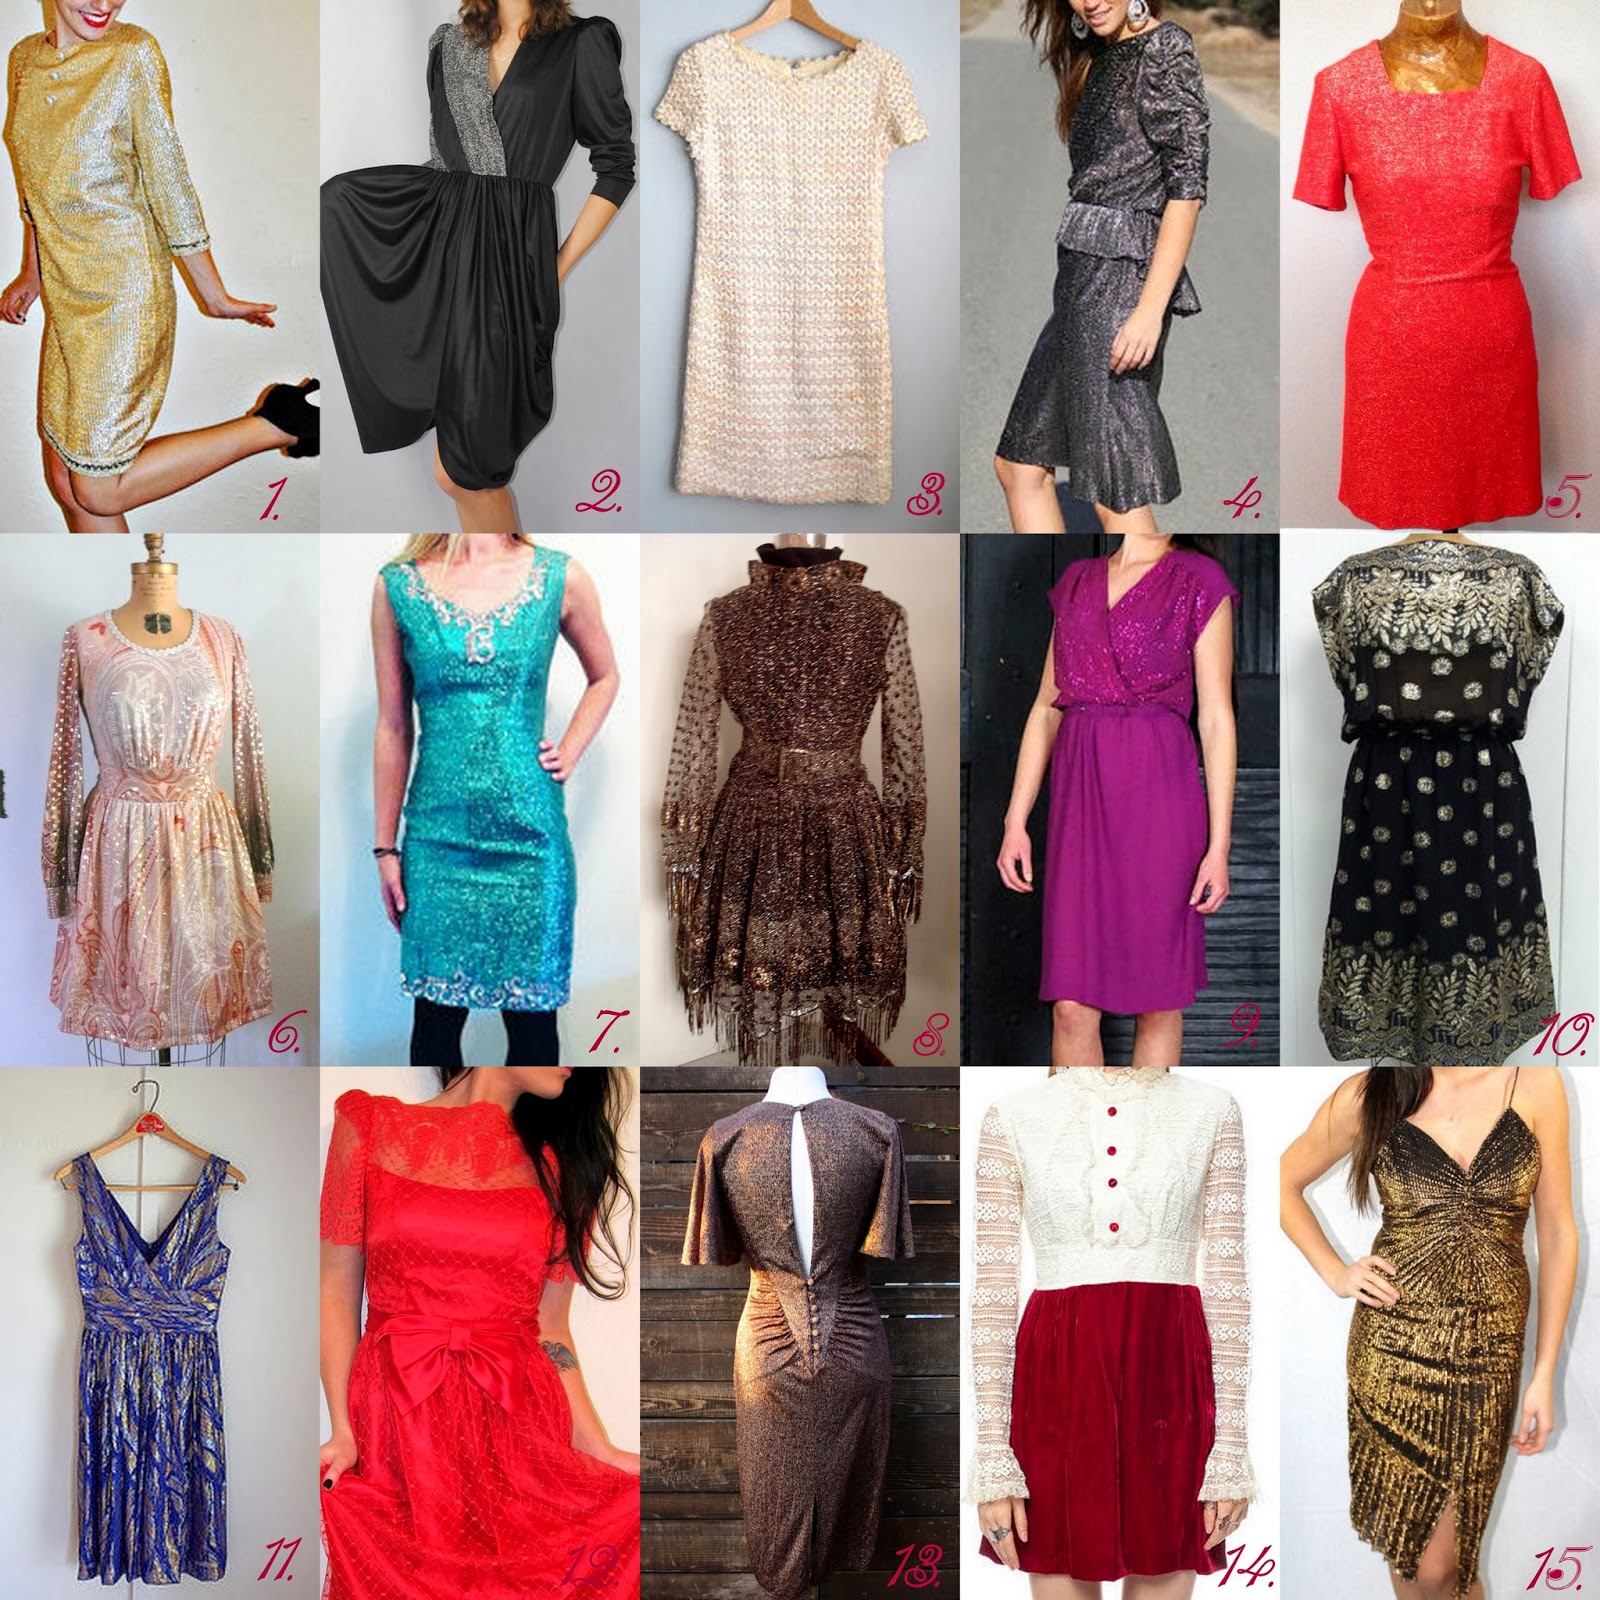 GYPSY YAYA: 15 Fabulous Vintage Dresses for the Holidays! (For Around $50)